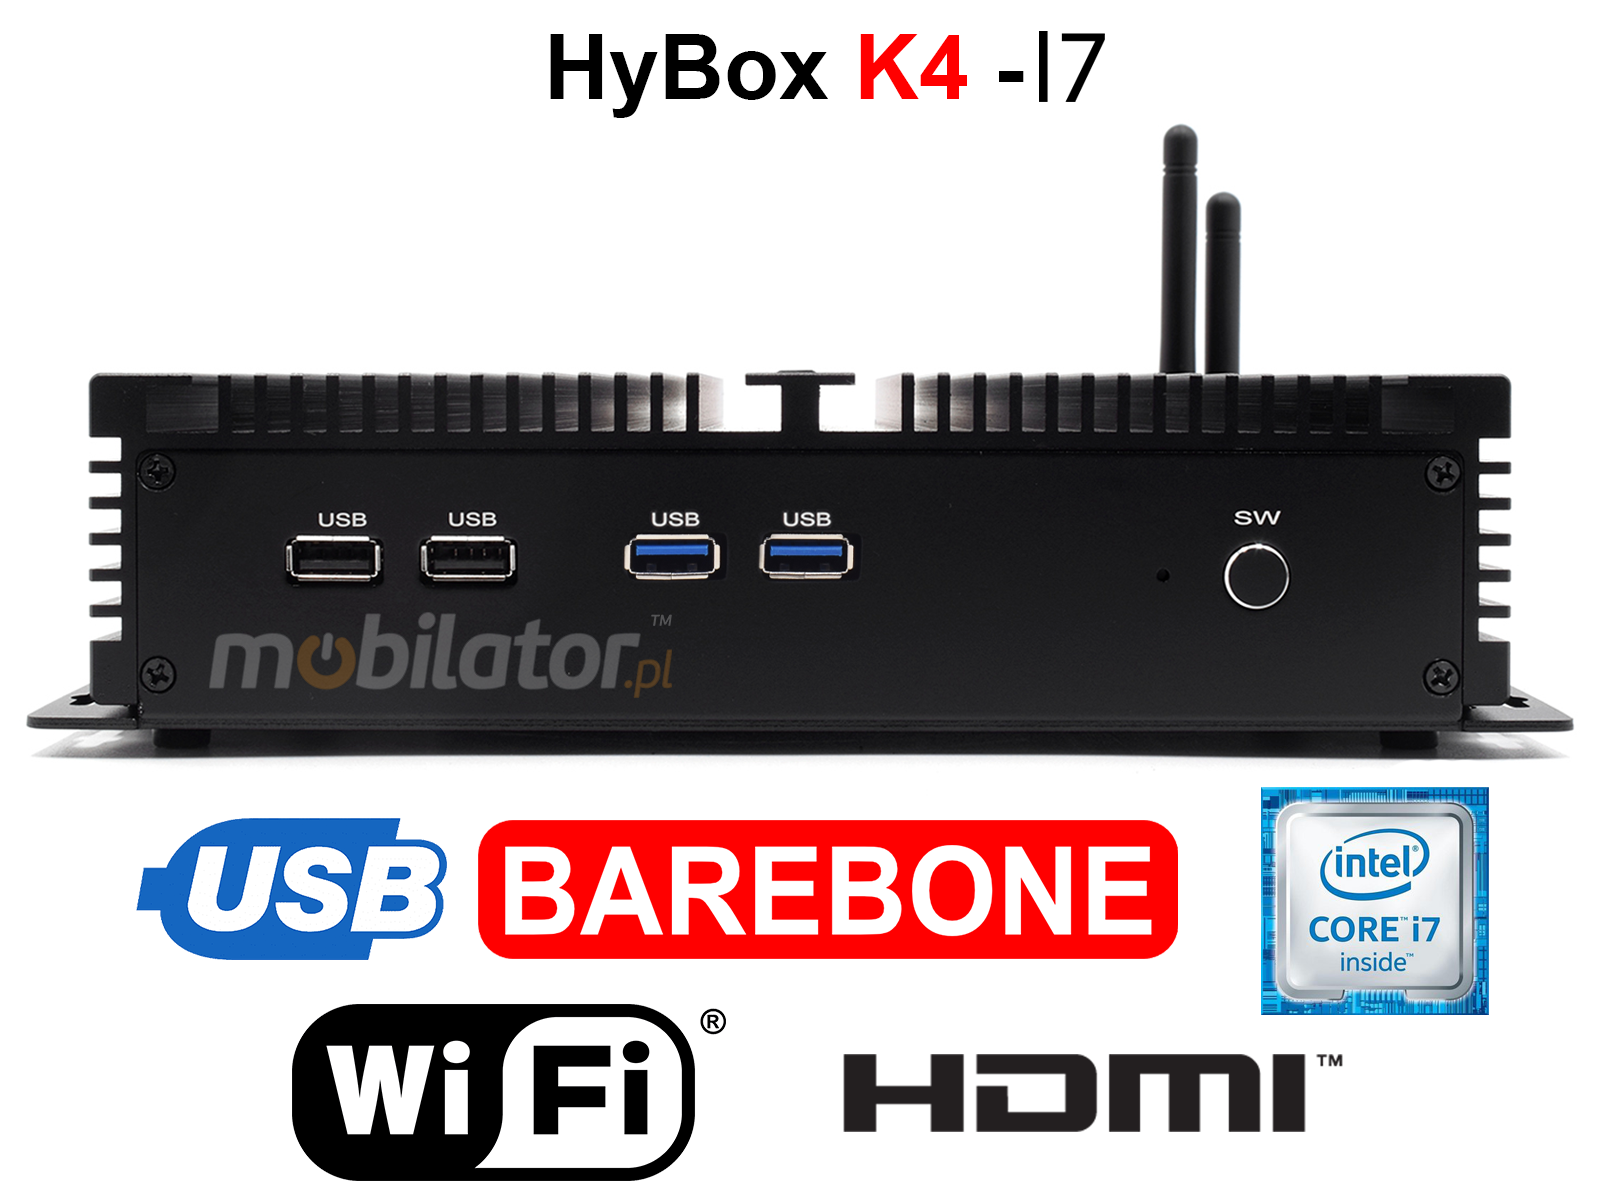 HyBOX K4 small reliable fast and efficient mini pc Linux